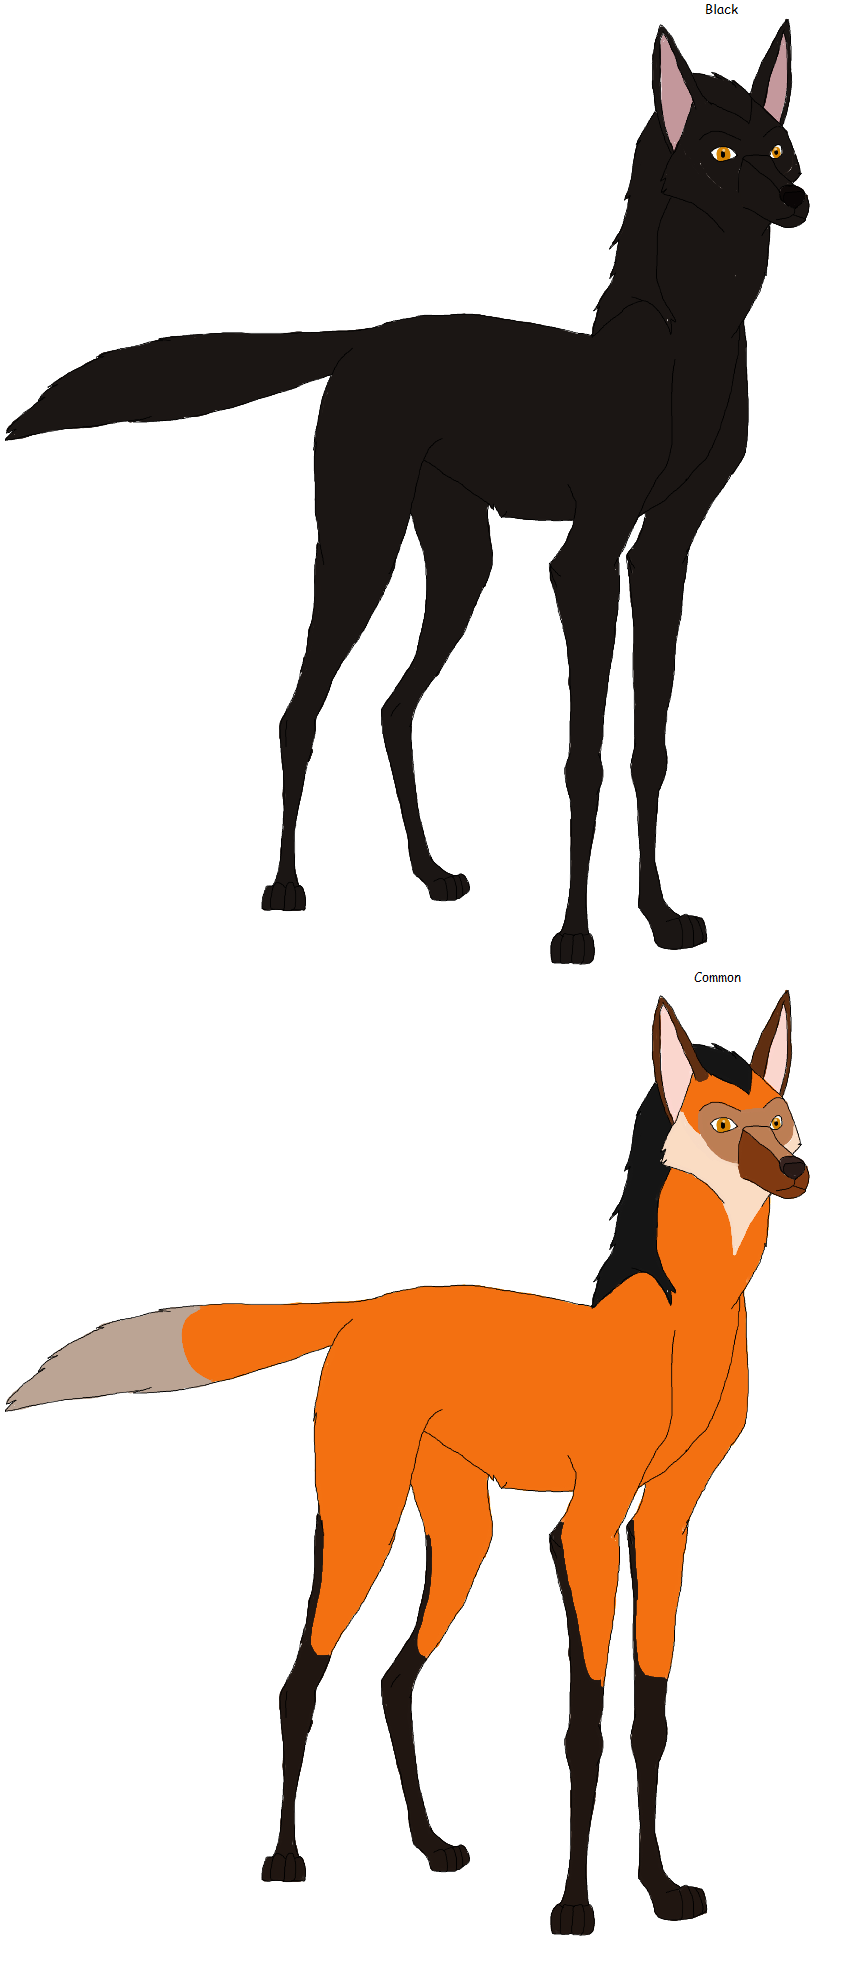 Maned Wolves by Patchi1995 on DeviantArt